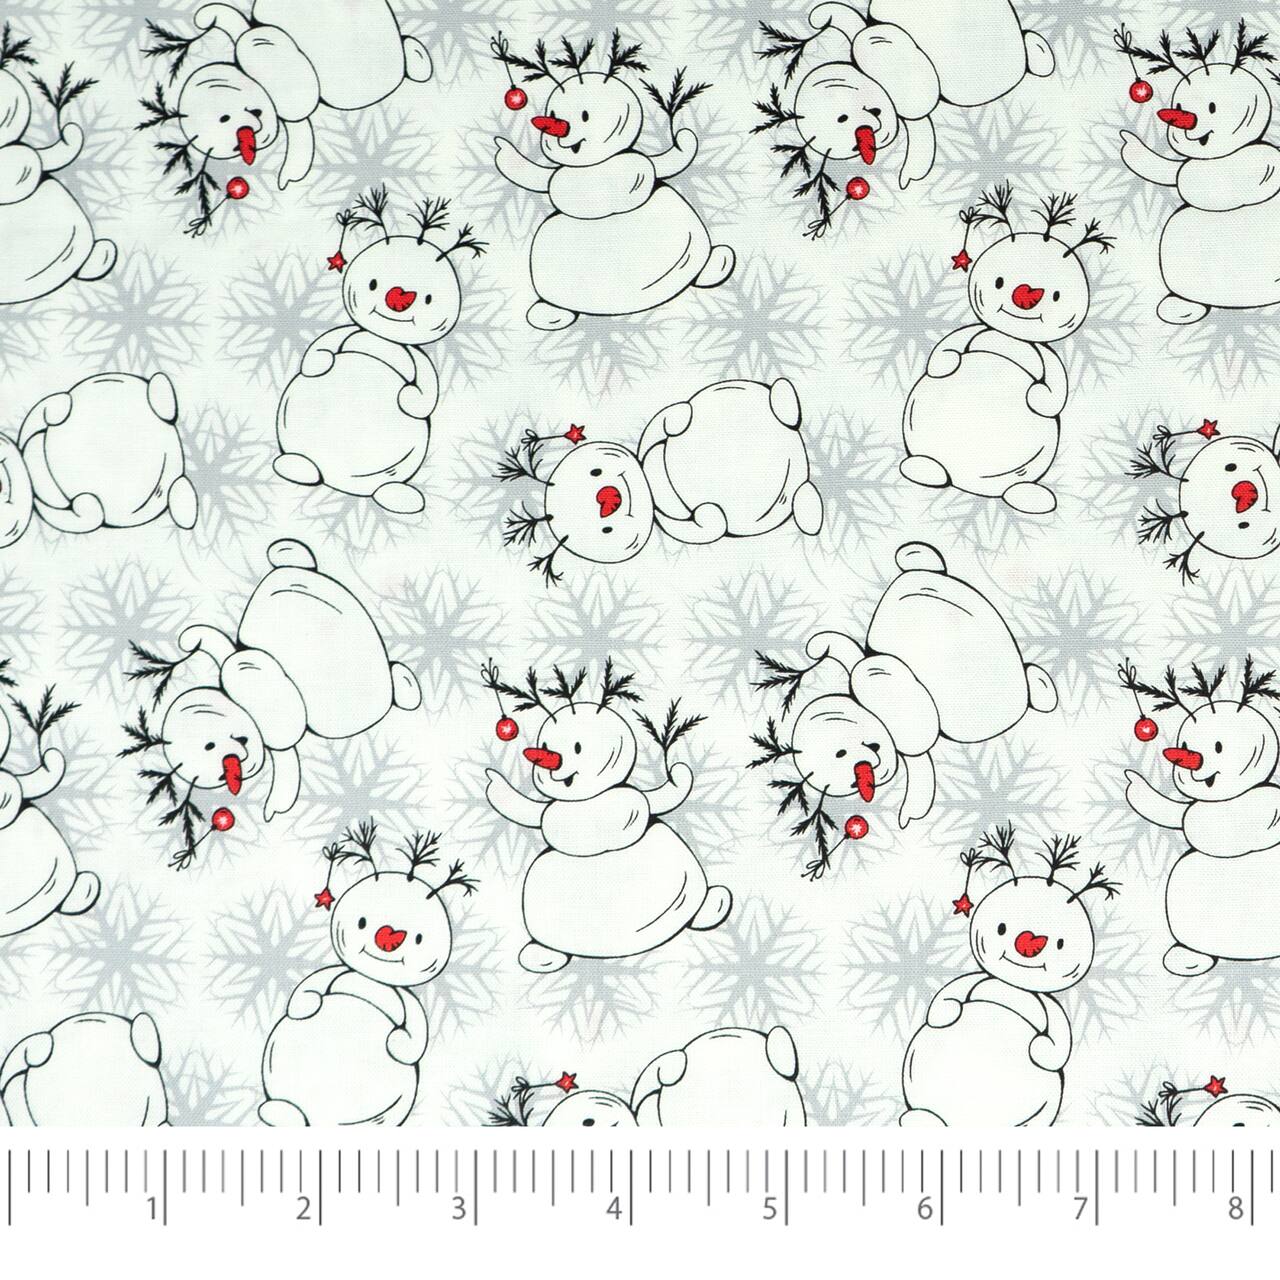 SINGER Christmas Holiday Penguins Snowman Cotton Fabric